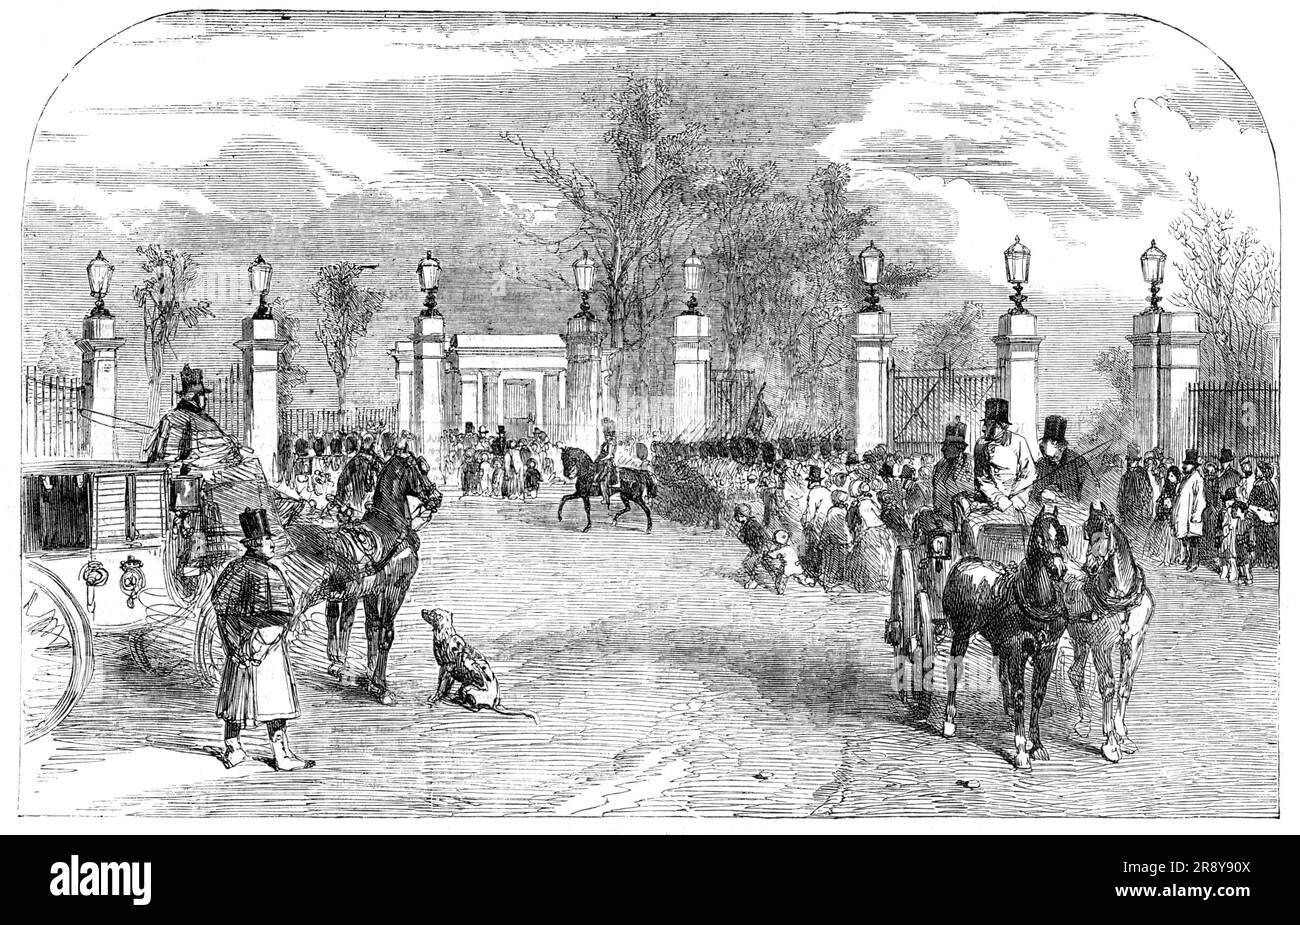 New Buckingham-Gate, St. James's Park, [London], 1857. View of '...the new Lodge and Buckingham Gate...the Park Lodge, which stood between the terminus of the road that passes in front of the Wellington Barracks and that through the Park has been removed; likewise the single gates, and in place of them handsome double gates, two to each entrance, have been erected; and a new lodge has been built...Our Artist has peopled his Illustration with the life and bustle of the full tide of the season. The style of the gates is good, and the stone piers and cast-iron gates are decidedly an improvement u Stock Photo